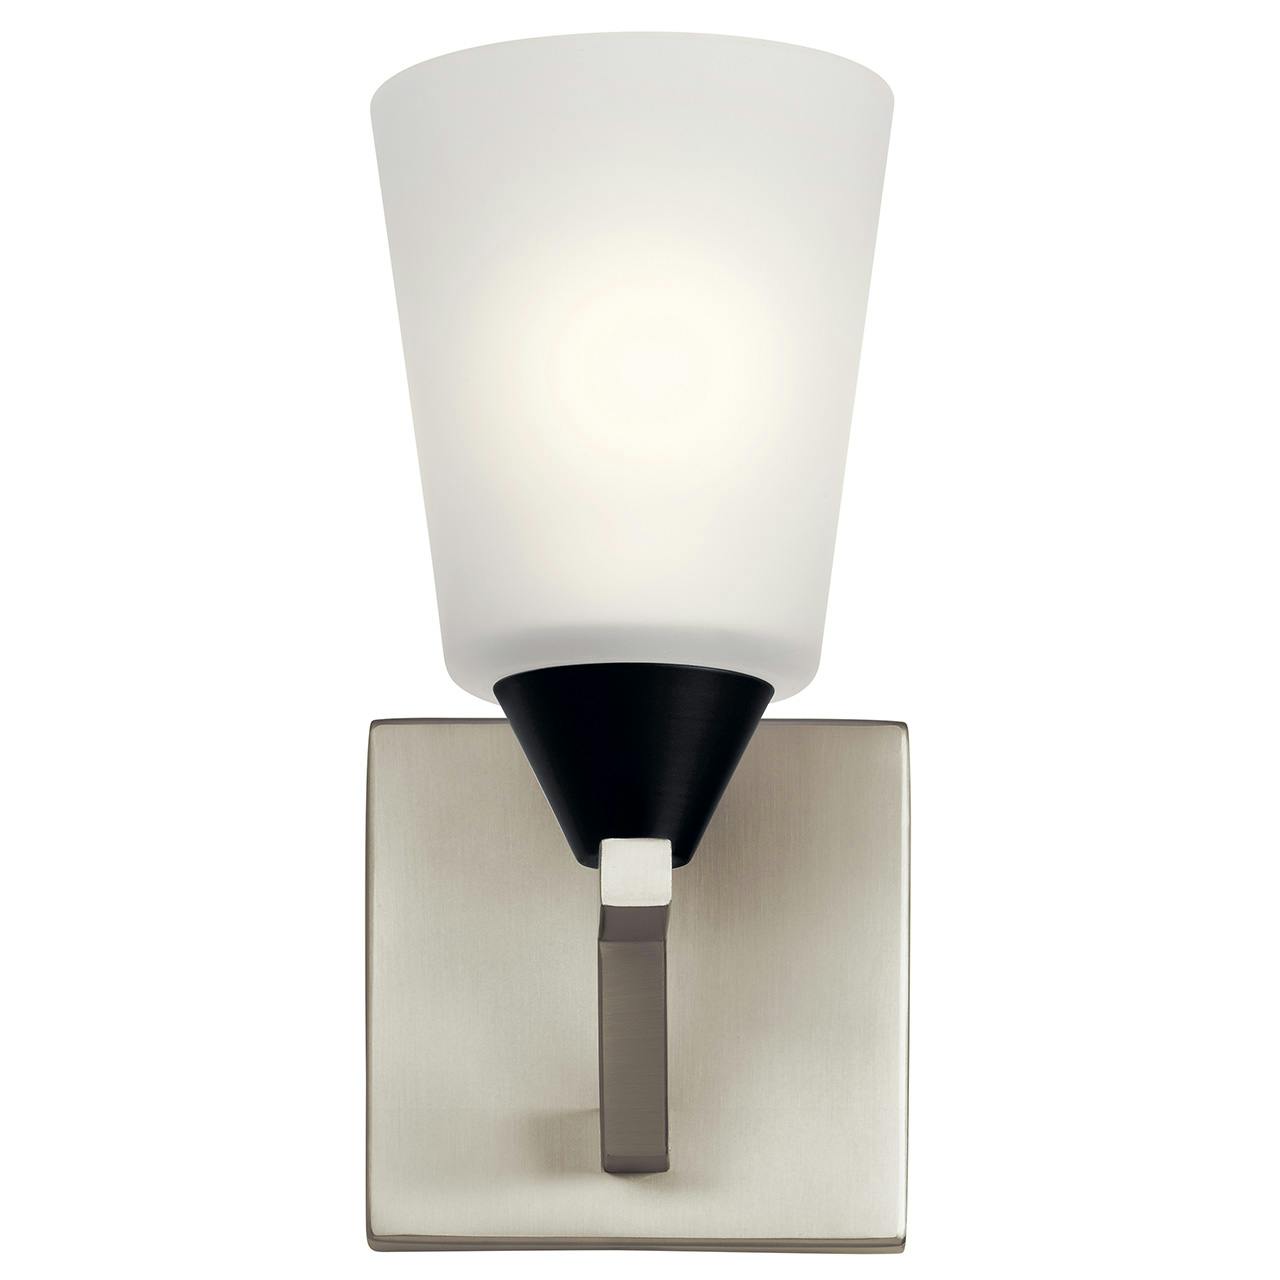 The Skagos 1 Light Wall Sconce Brushed Nickel facing up on a white background